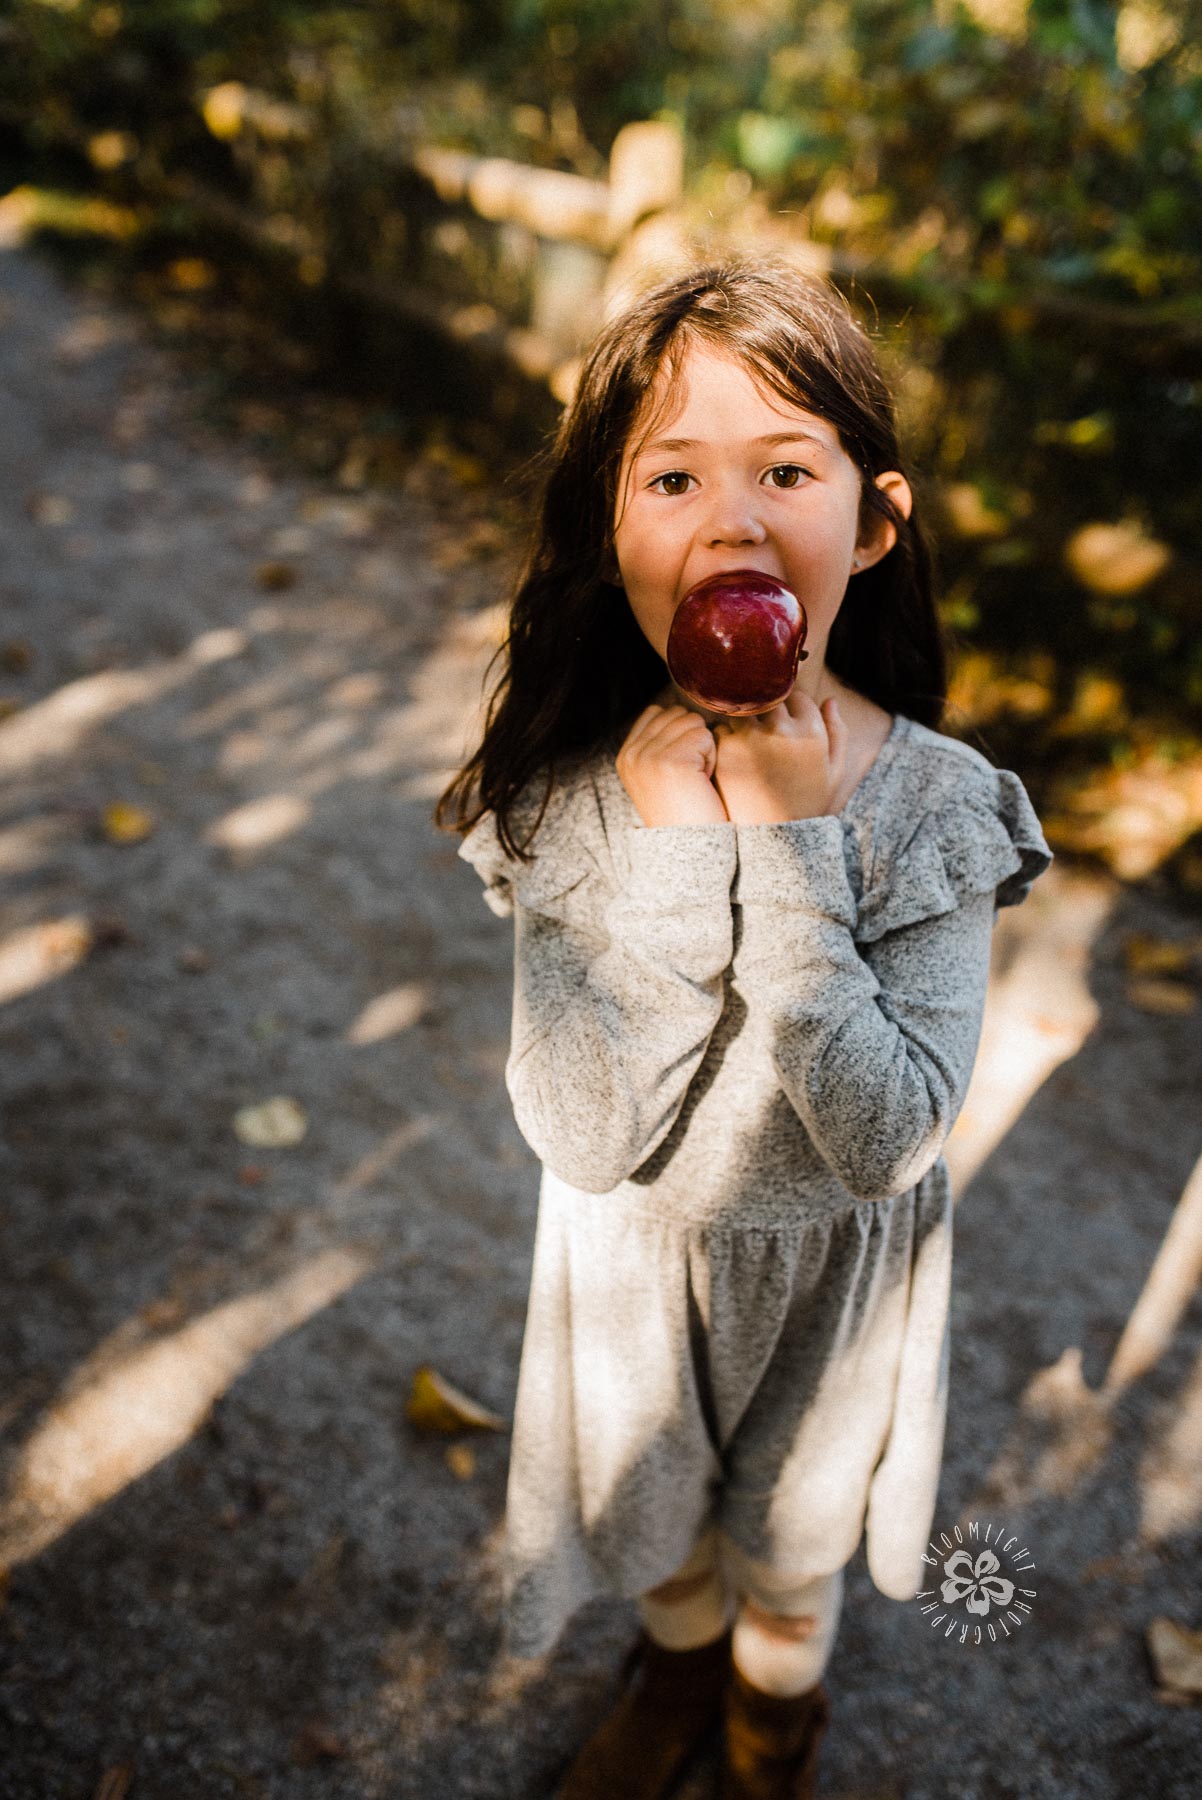 A playful girl holding a red apple in her mouth